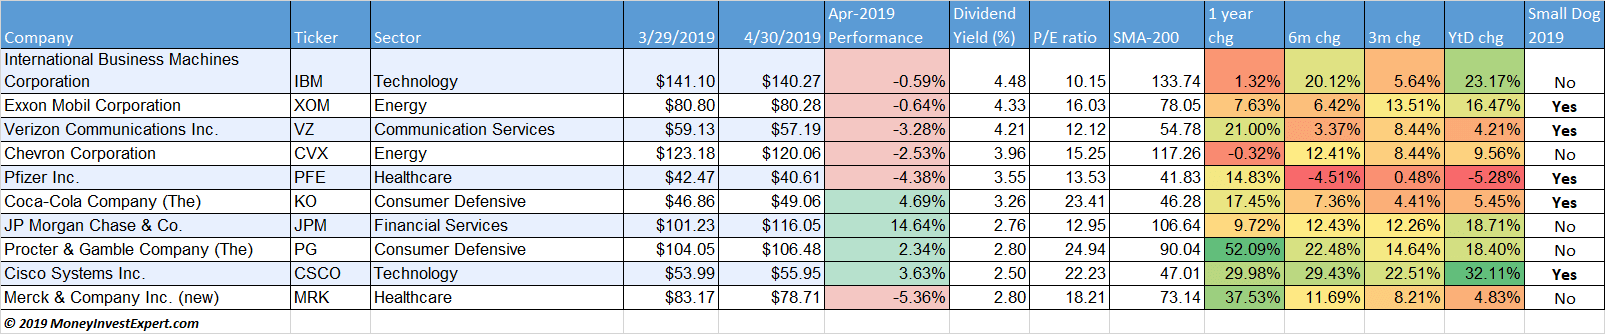 dogs-of-the-dow-april-2019-table